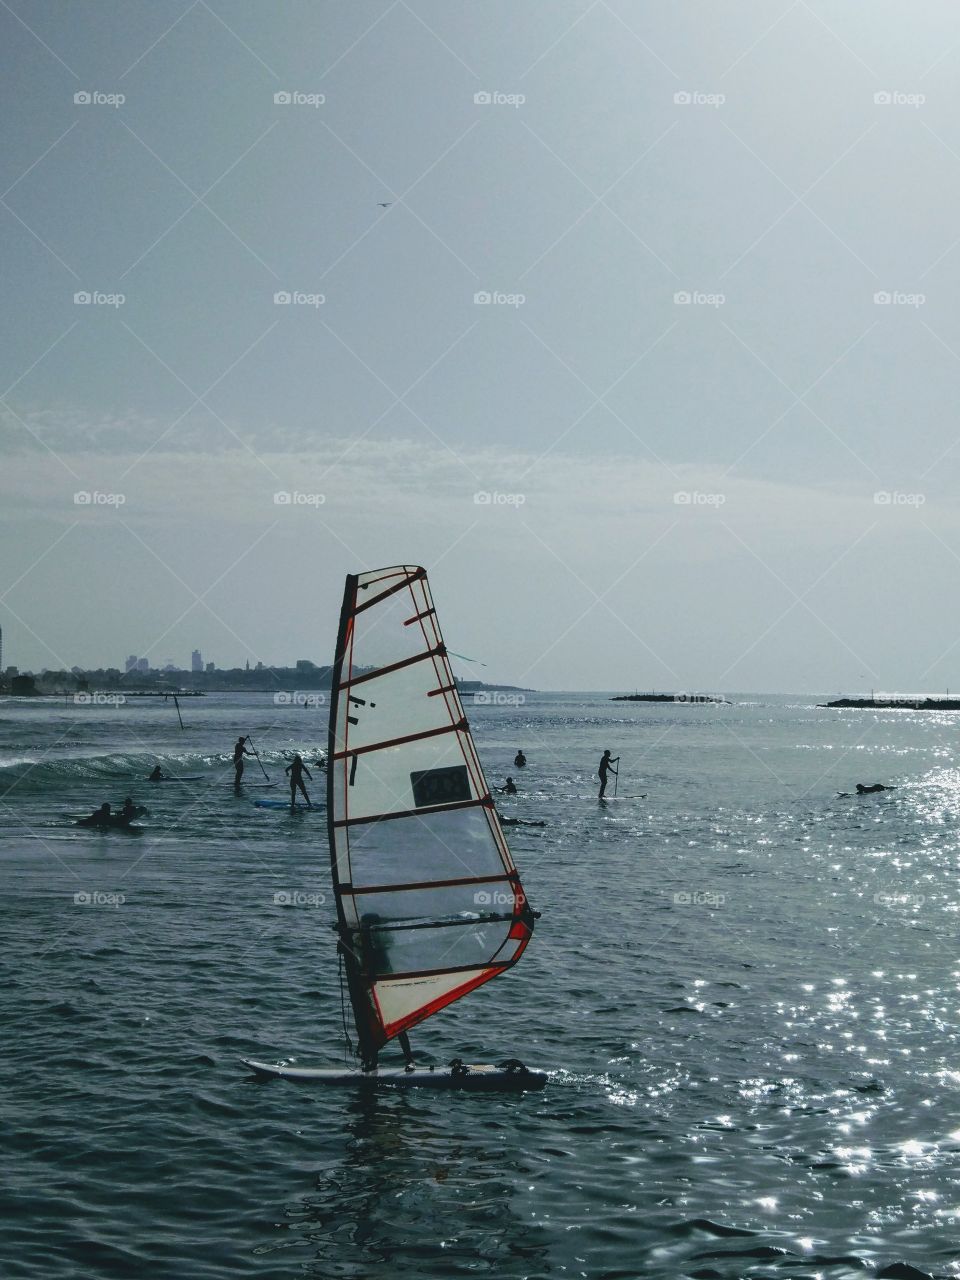 Windsurfing, SUP, and other water activities